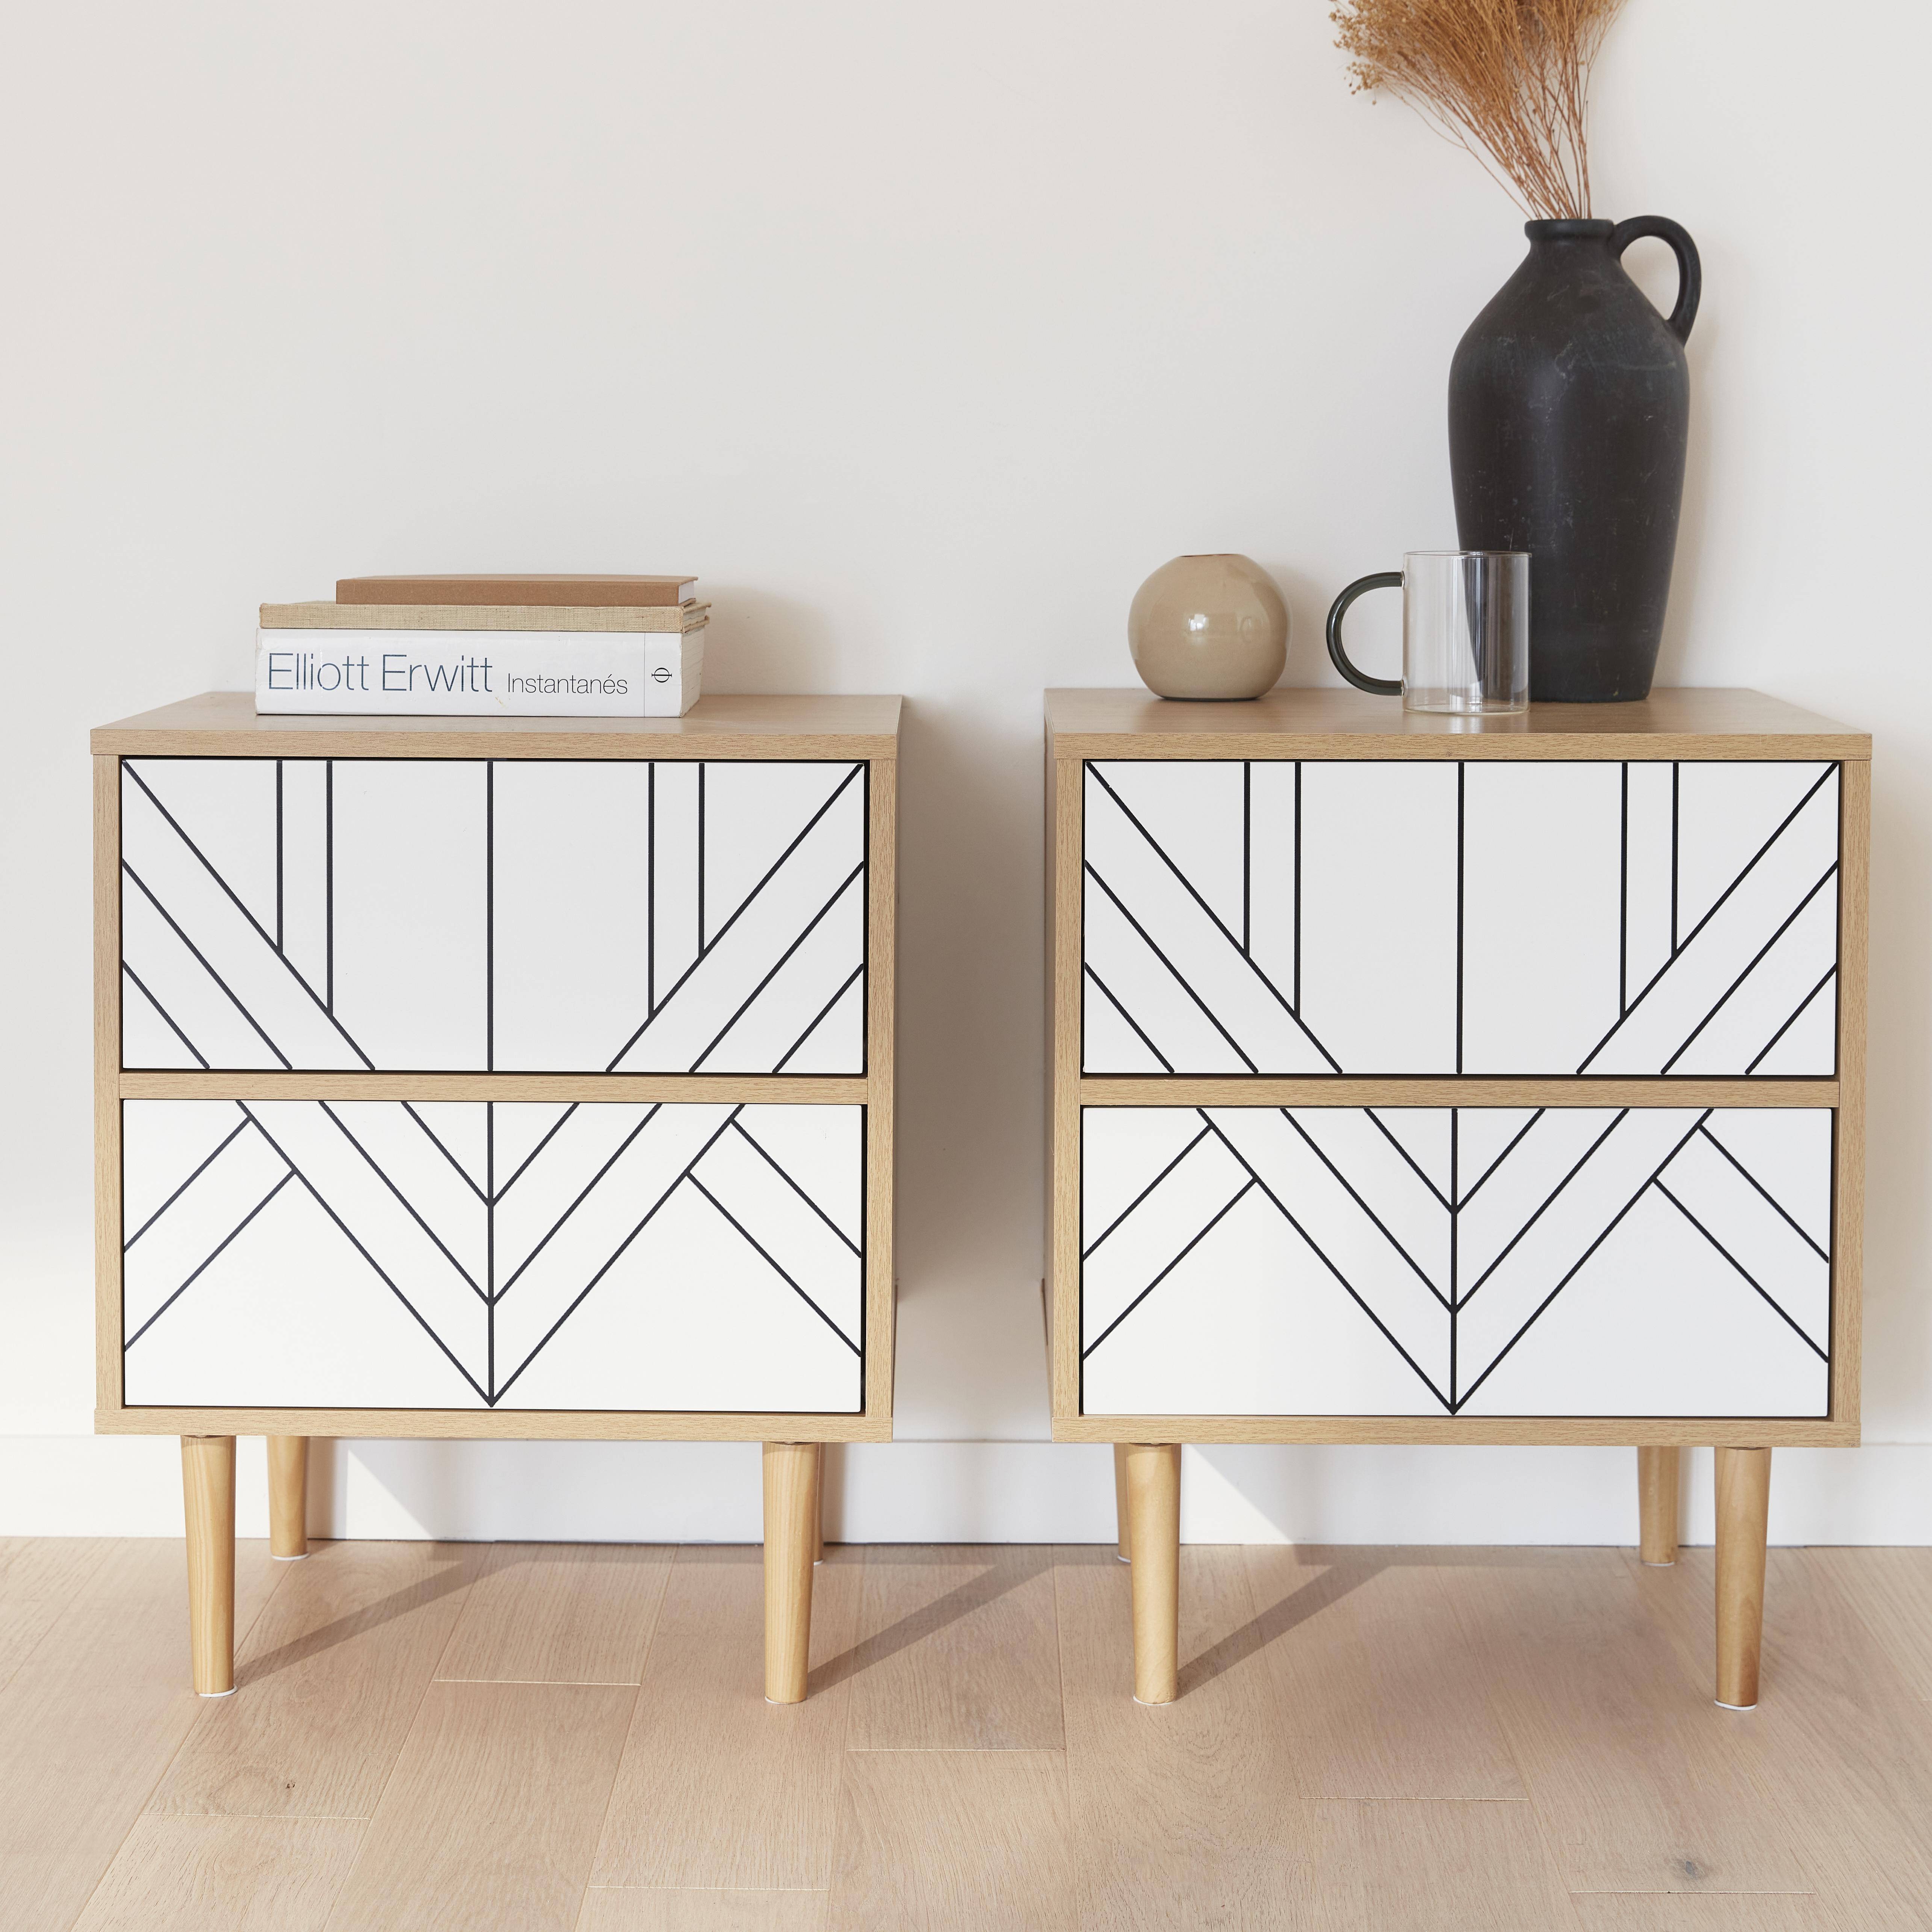 Pair of wood-effect bedside tables with two drawers, 48x40x59cm - Mika - White,sweeek,Photo1